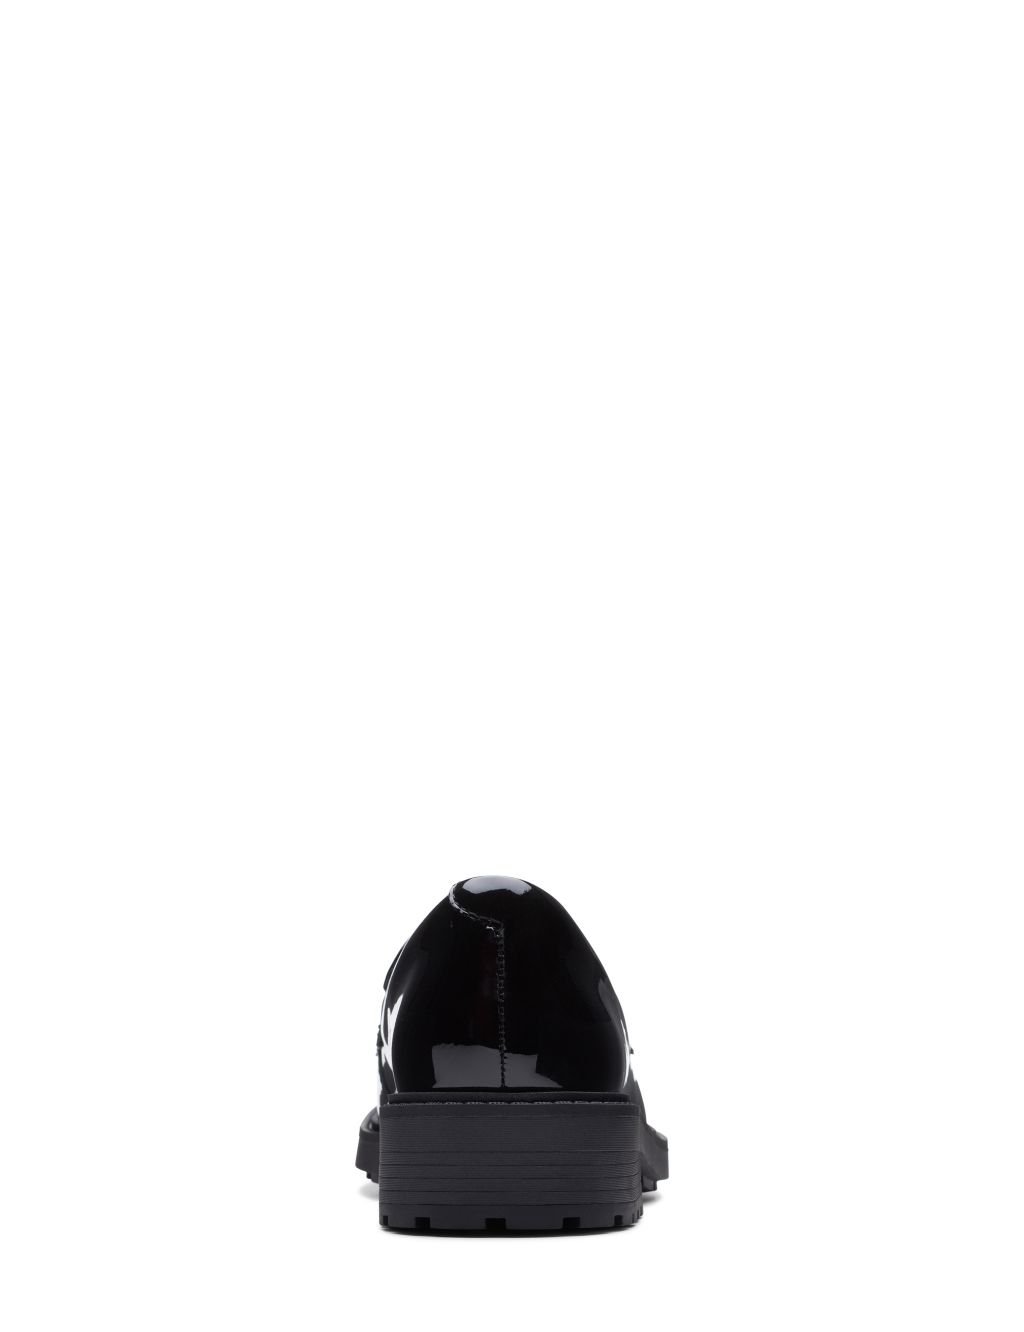 Leather Chunky Block Heel Loafers image 7